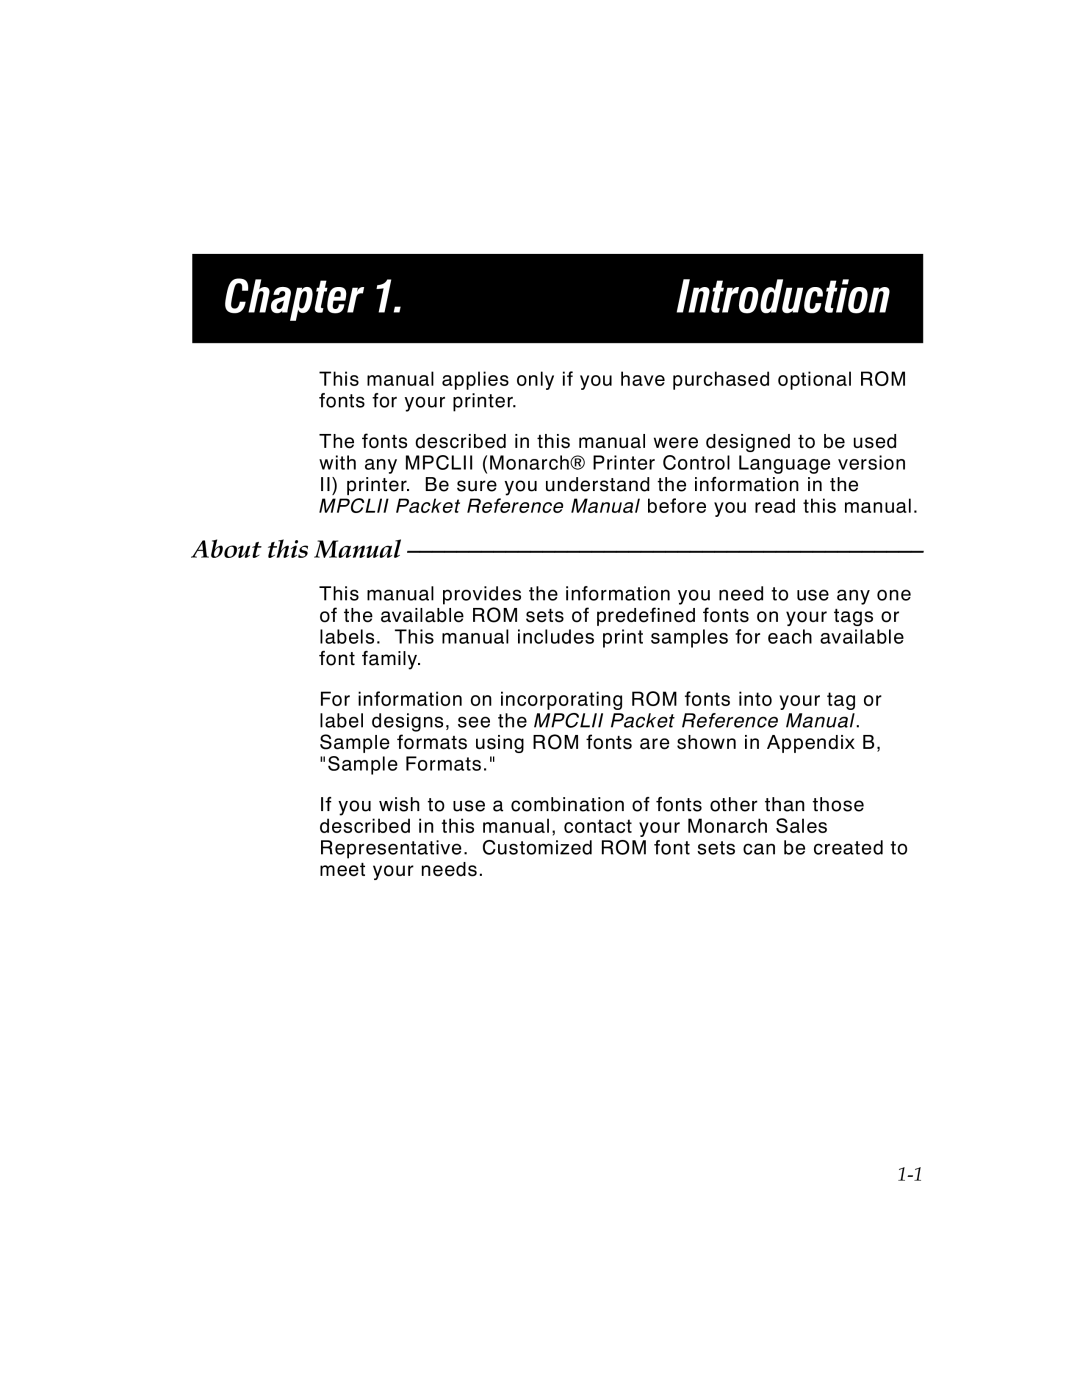 Paxar MPCL II manual Chapter, Introduction, About this Manual 